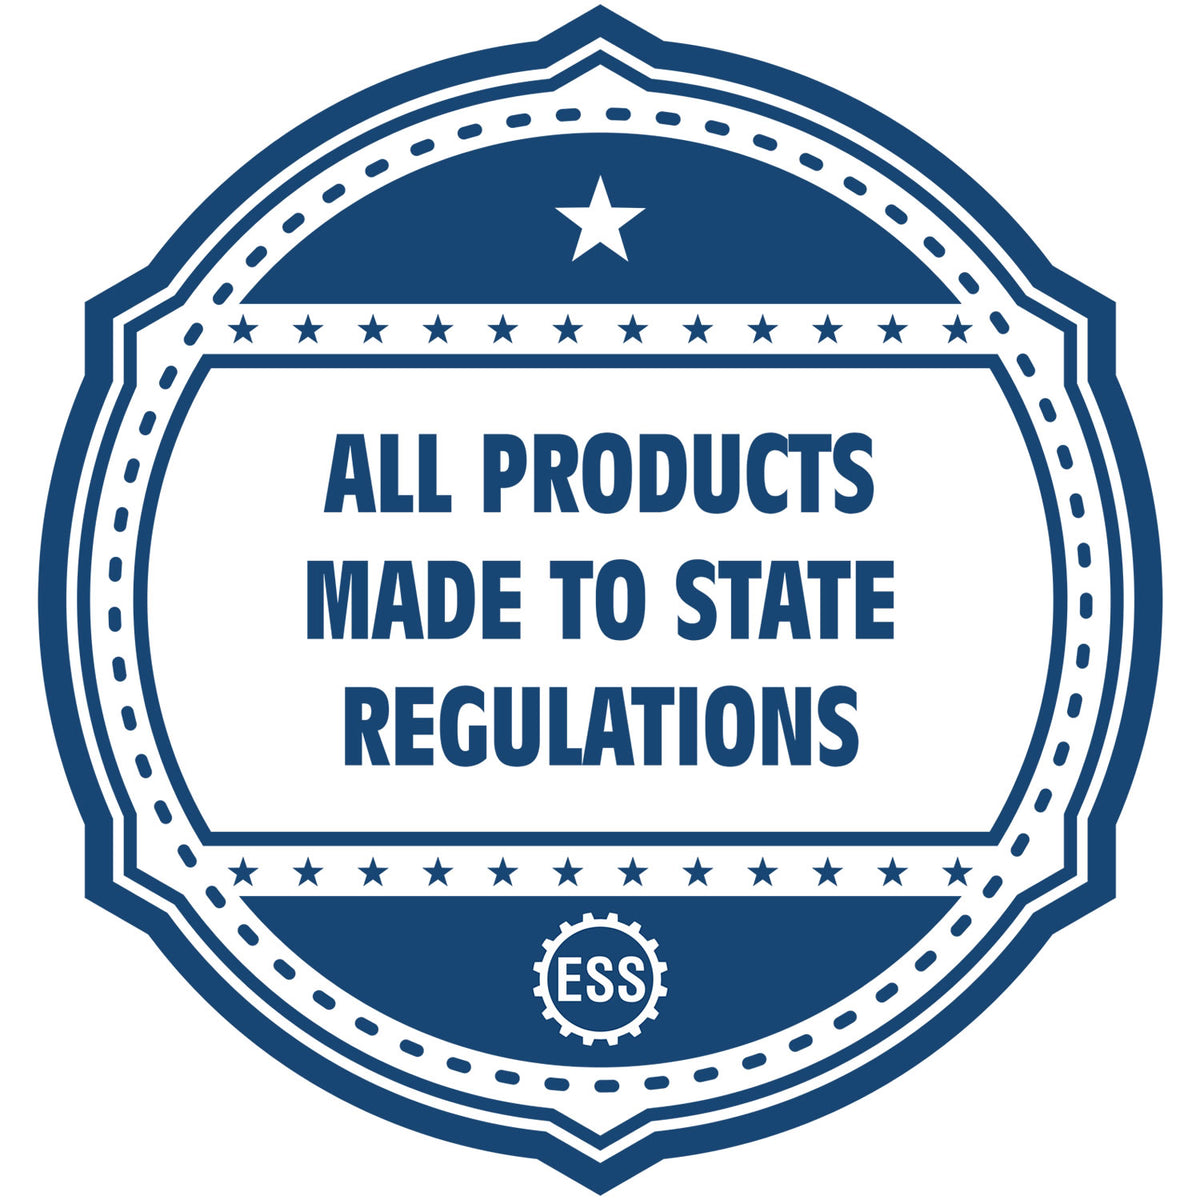 An icon or badge element for the Slim Pre-Inked Alabama Land Surveyor Seal Stamp showing that this product is made in compliance with state regulations.